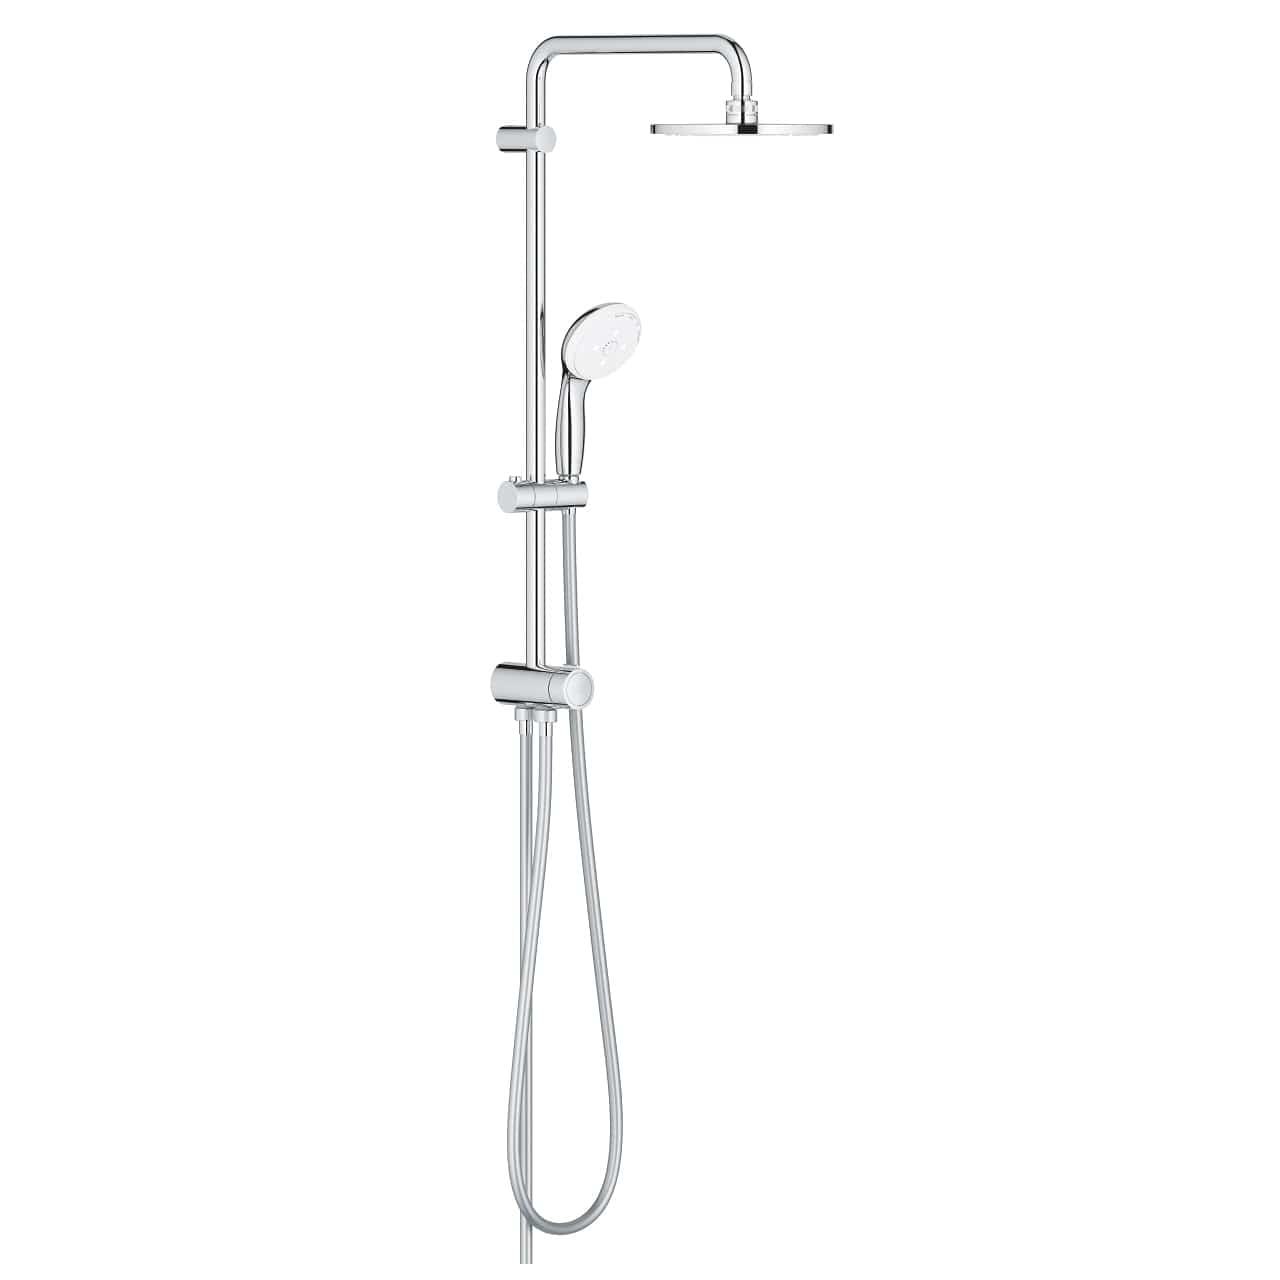 Grohe Tempesta 100 Wall Holder Shower Handle Set with 2 Sprays, Chrome, Supply Master